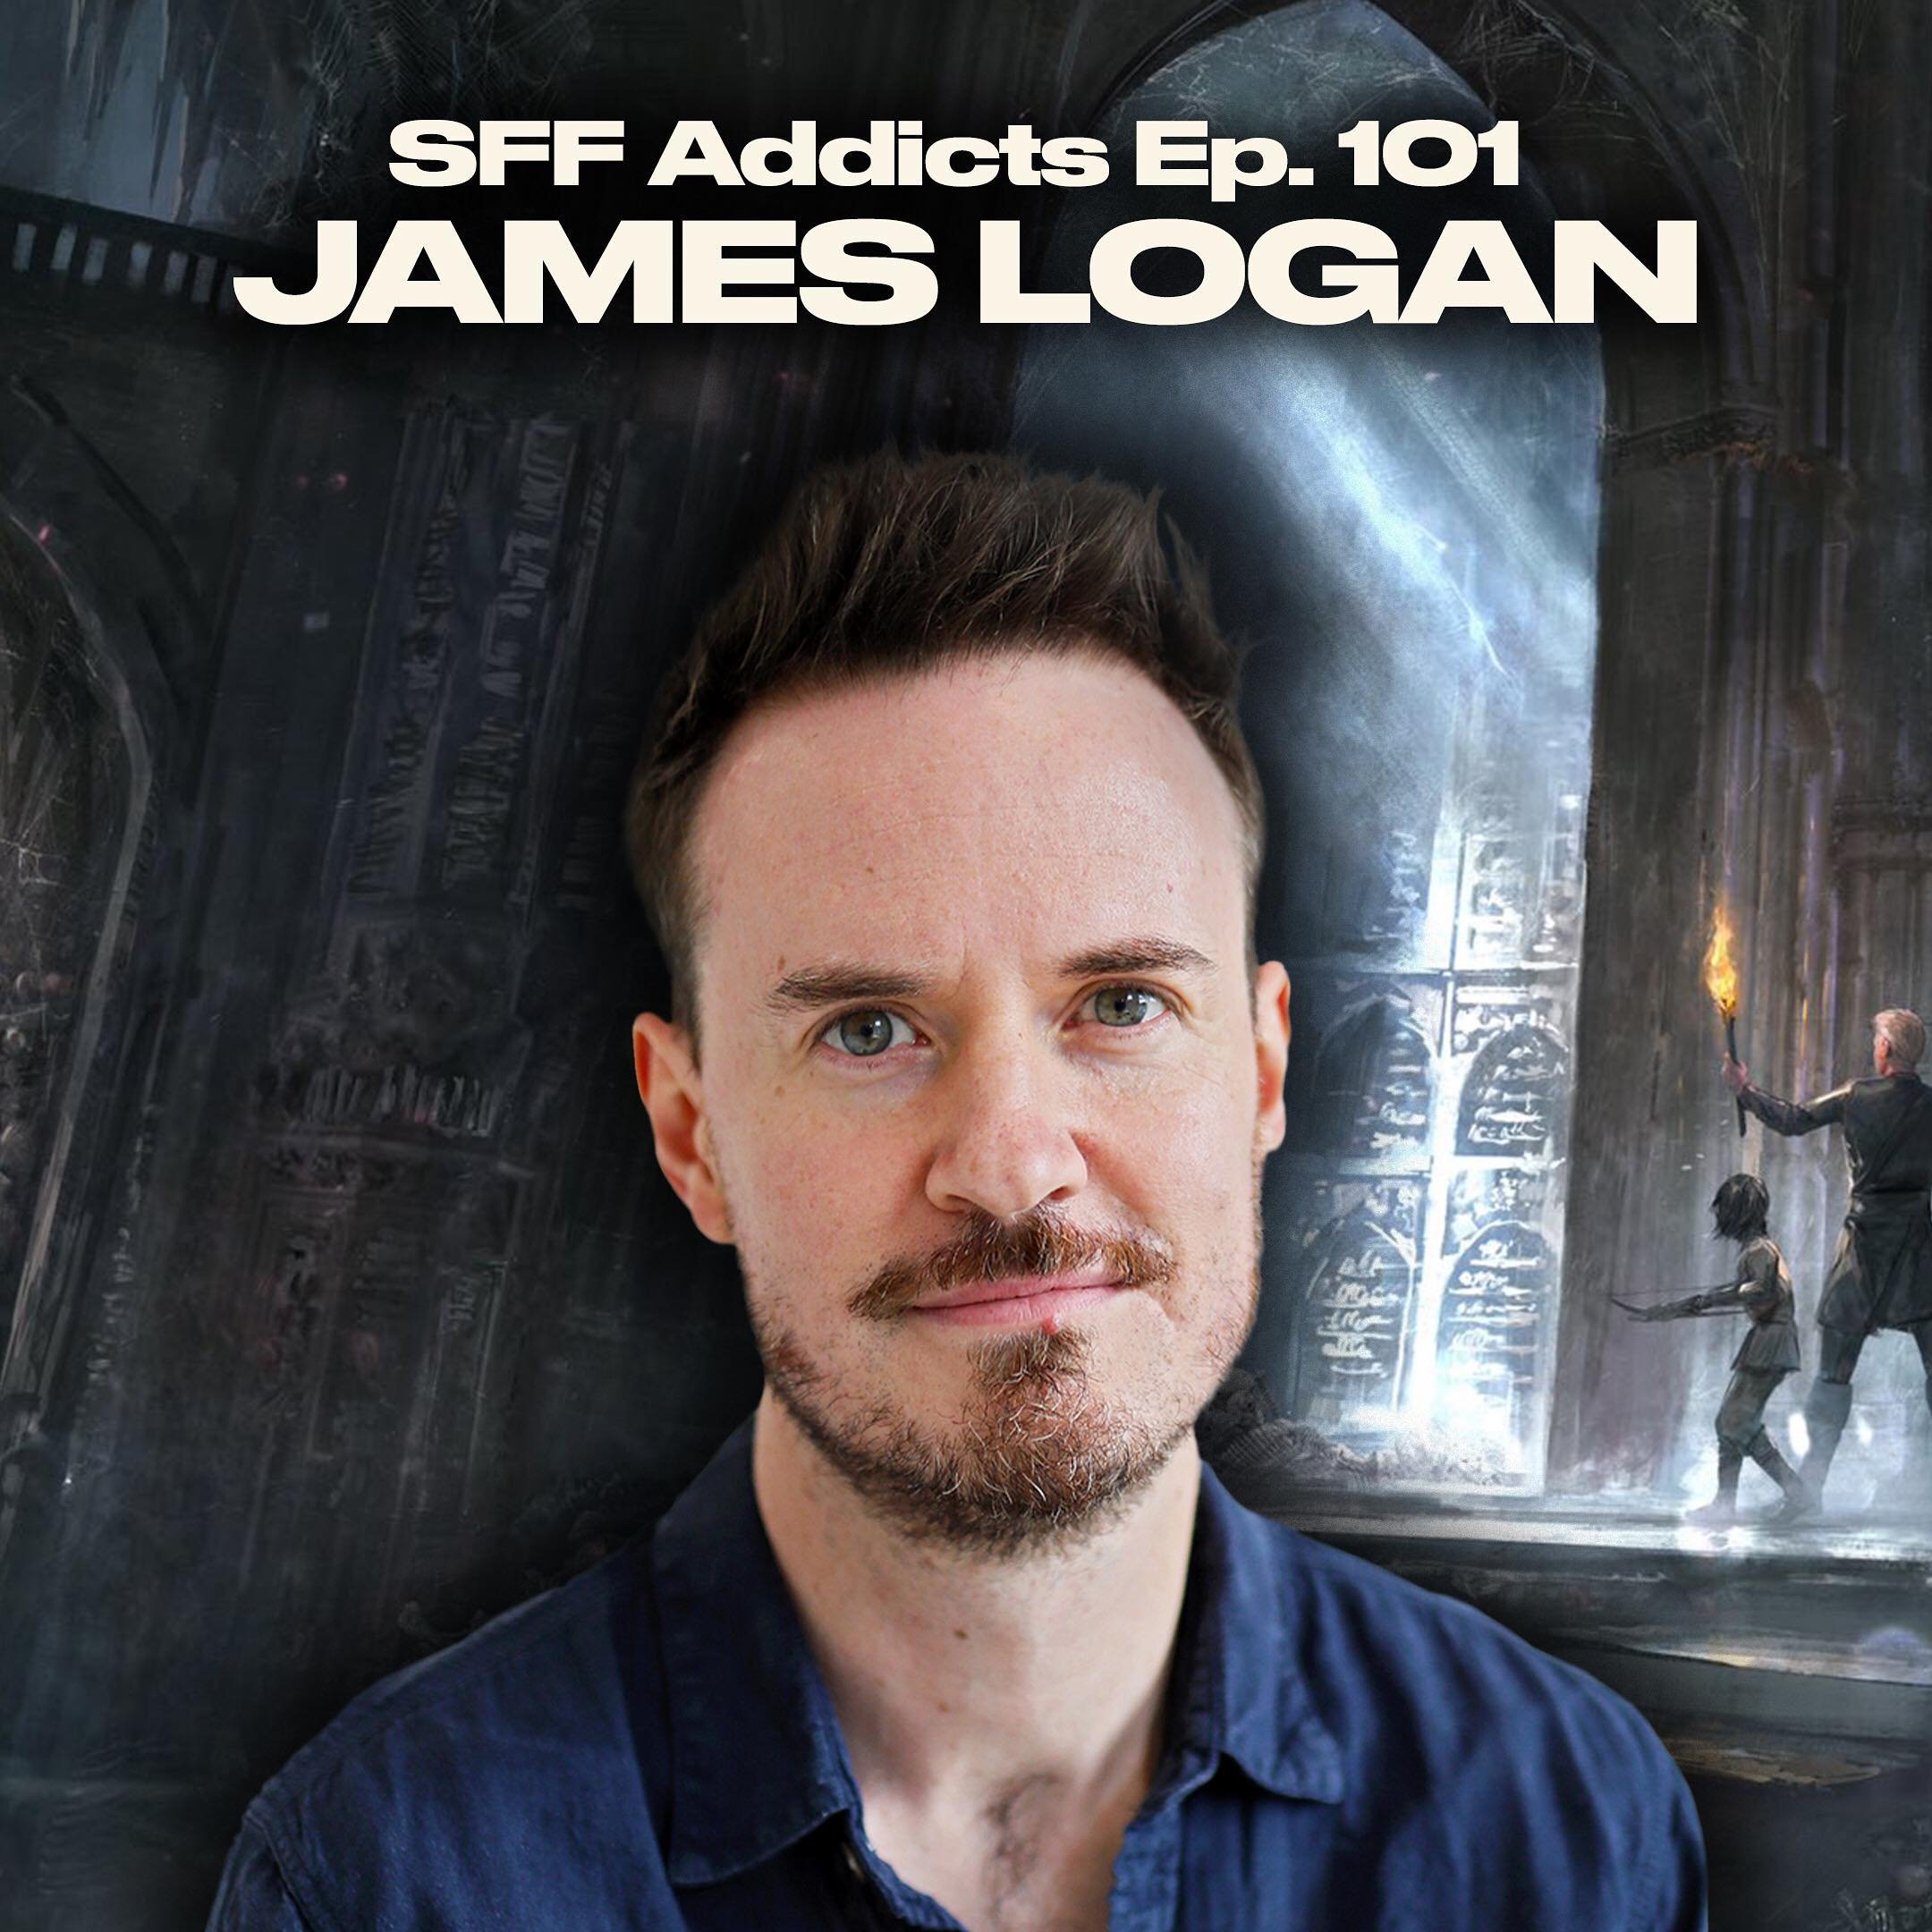 Ep. 101 of @sffaddictspod is LIVE! Join my co-host @mjkuhnbooks and I as we chat with author/editor @jamesloganauthor about his debut novel The Silverblood Promise, publishing, editing, Indiana Jones and more.

And don&rsquo;t forget, you can support